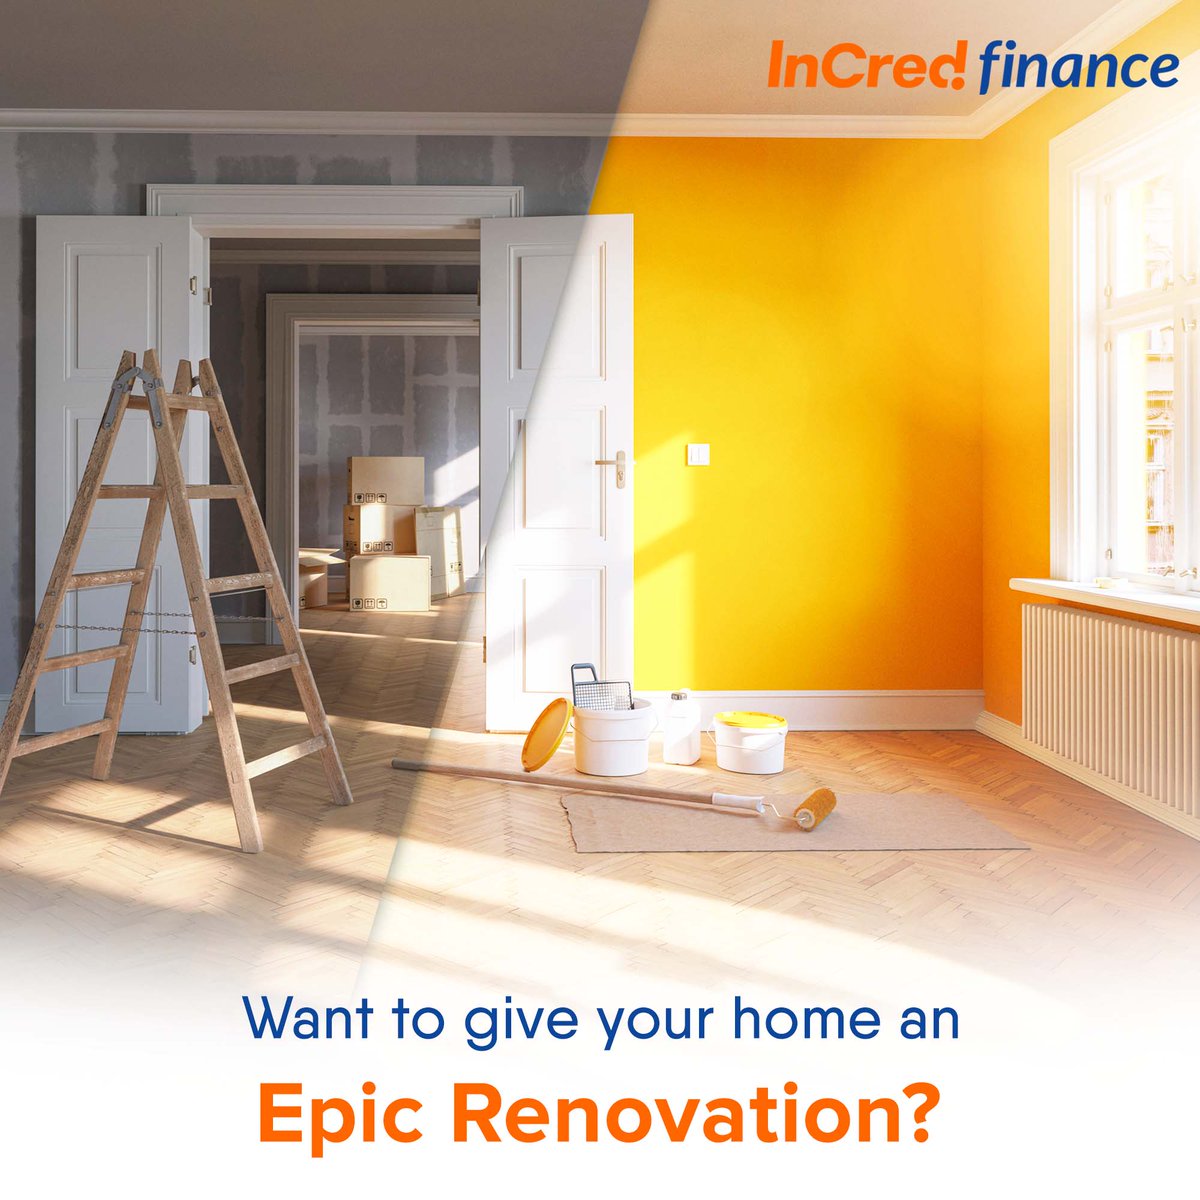 Transform your humble abode into a masterpiece with InCred Personal Loan - bit.ly/3qvlCu1
.
.
.
#InCredFinance #FinTech #PersonalLoans #HomeRenovation #FulfillingDreams #InstantLoan